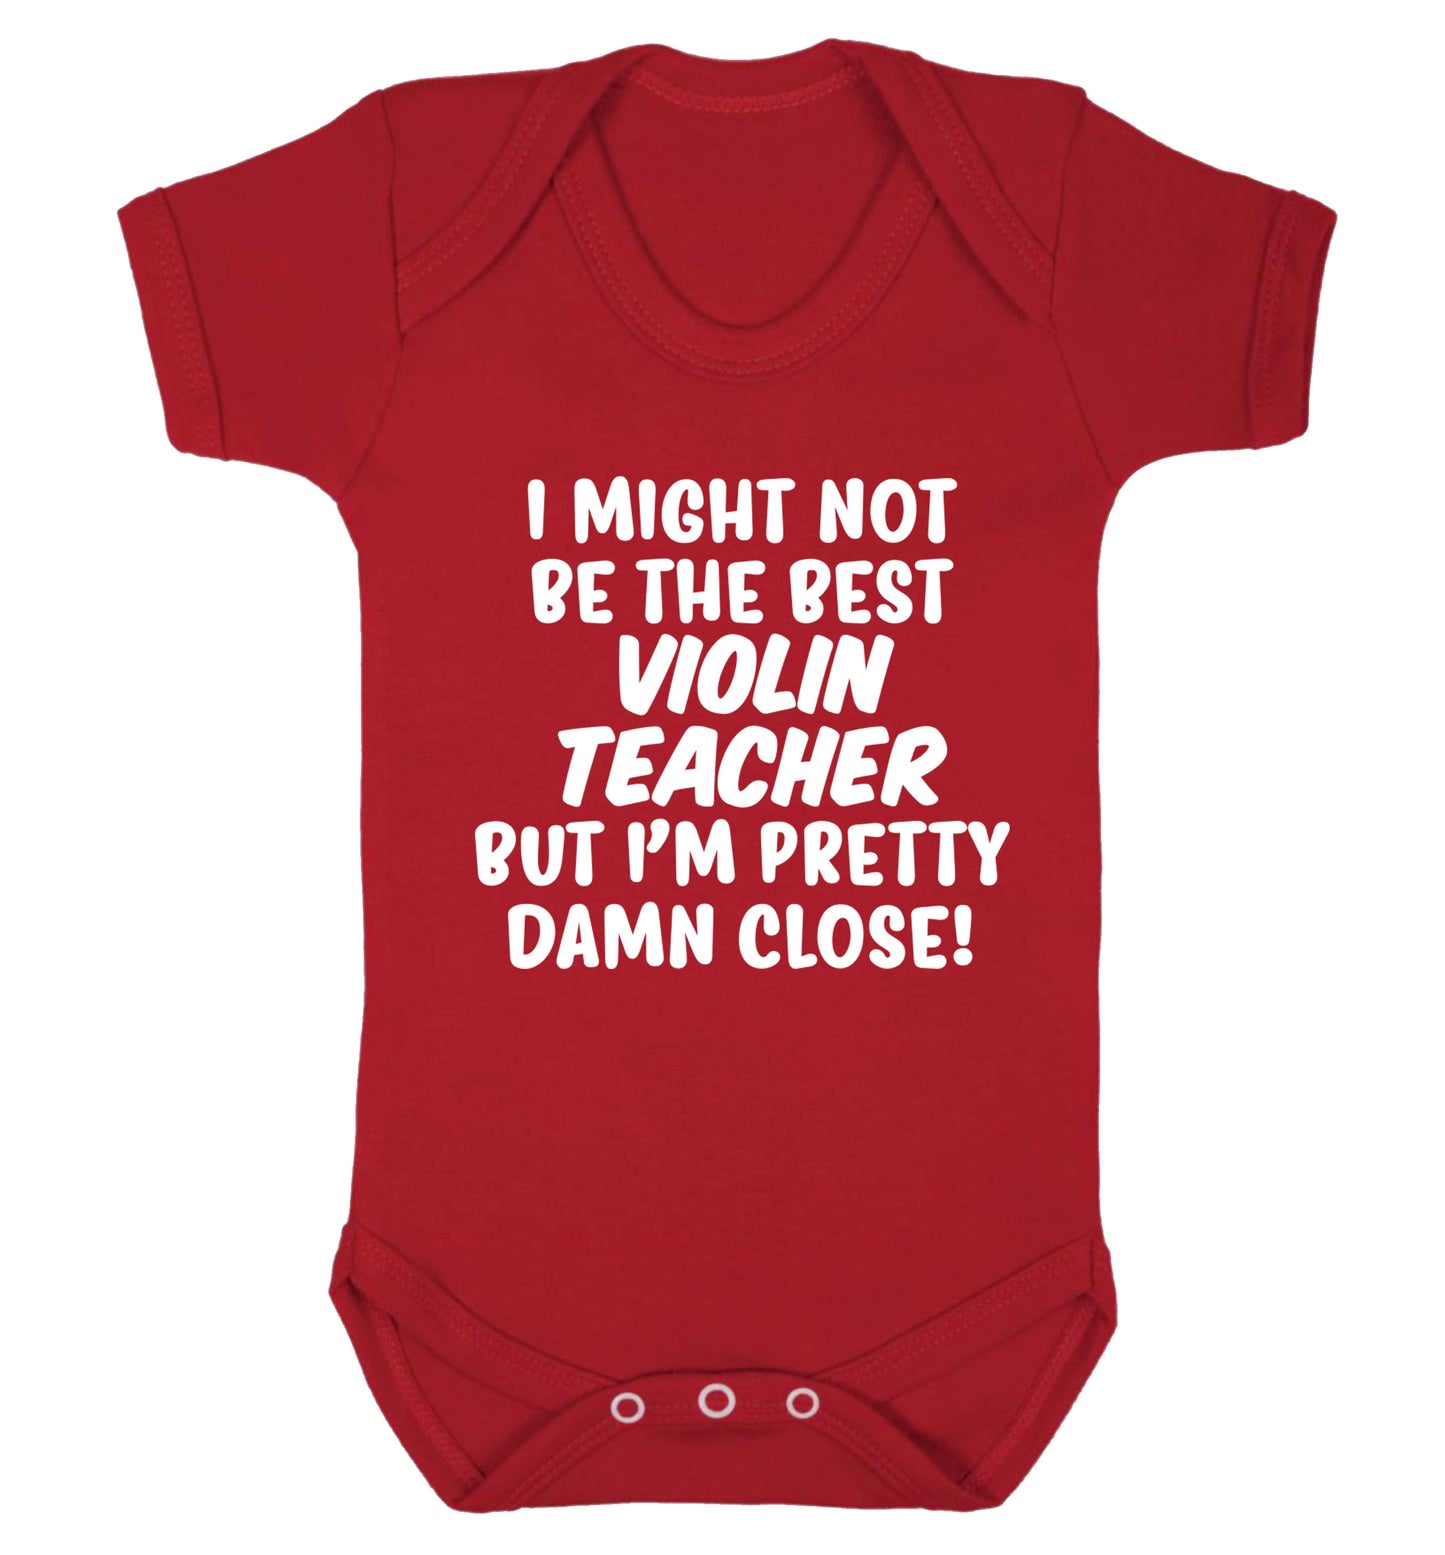 I might not be the best violin teacher but I'm pretty close Baby Vest red 18-24 months